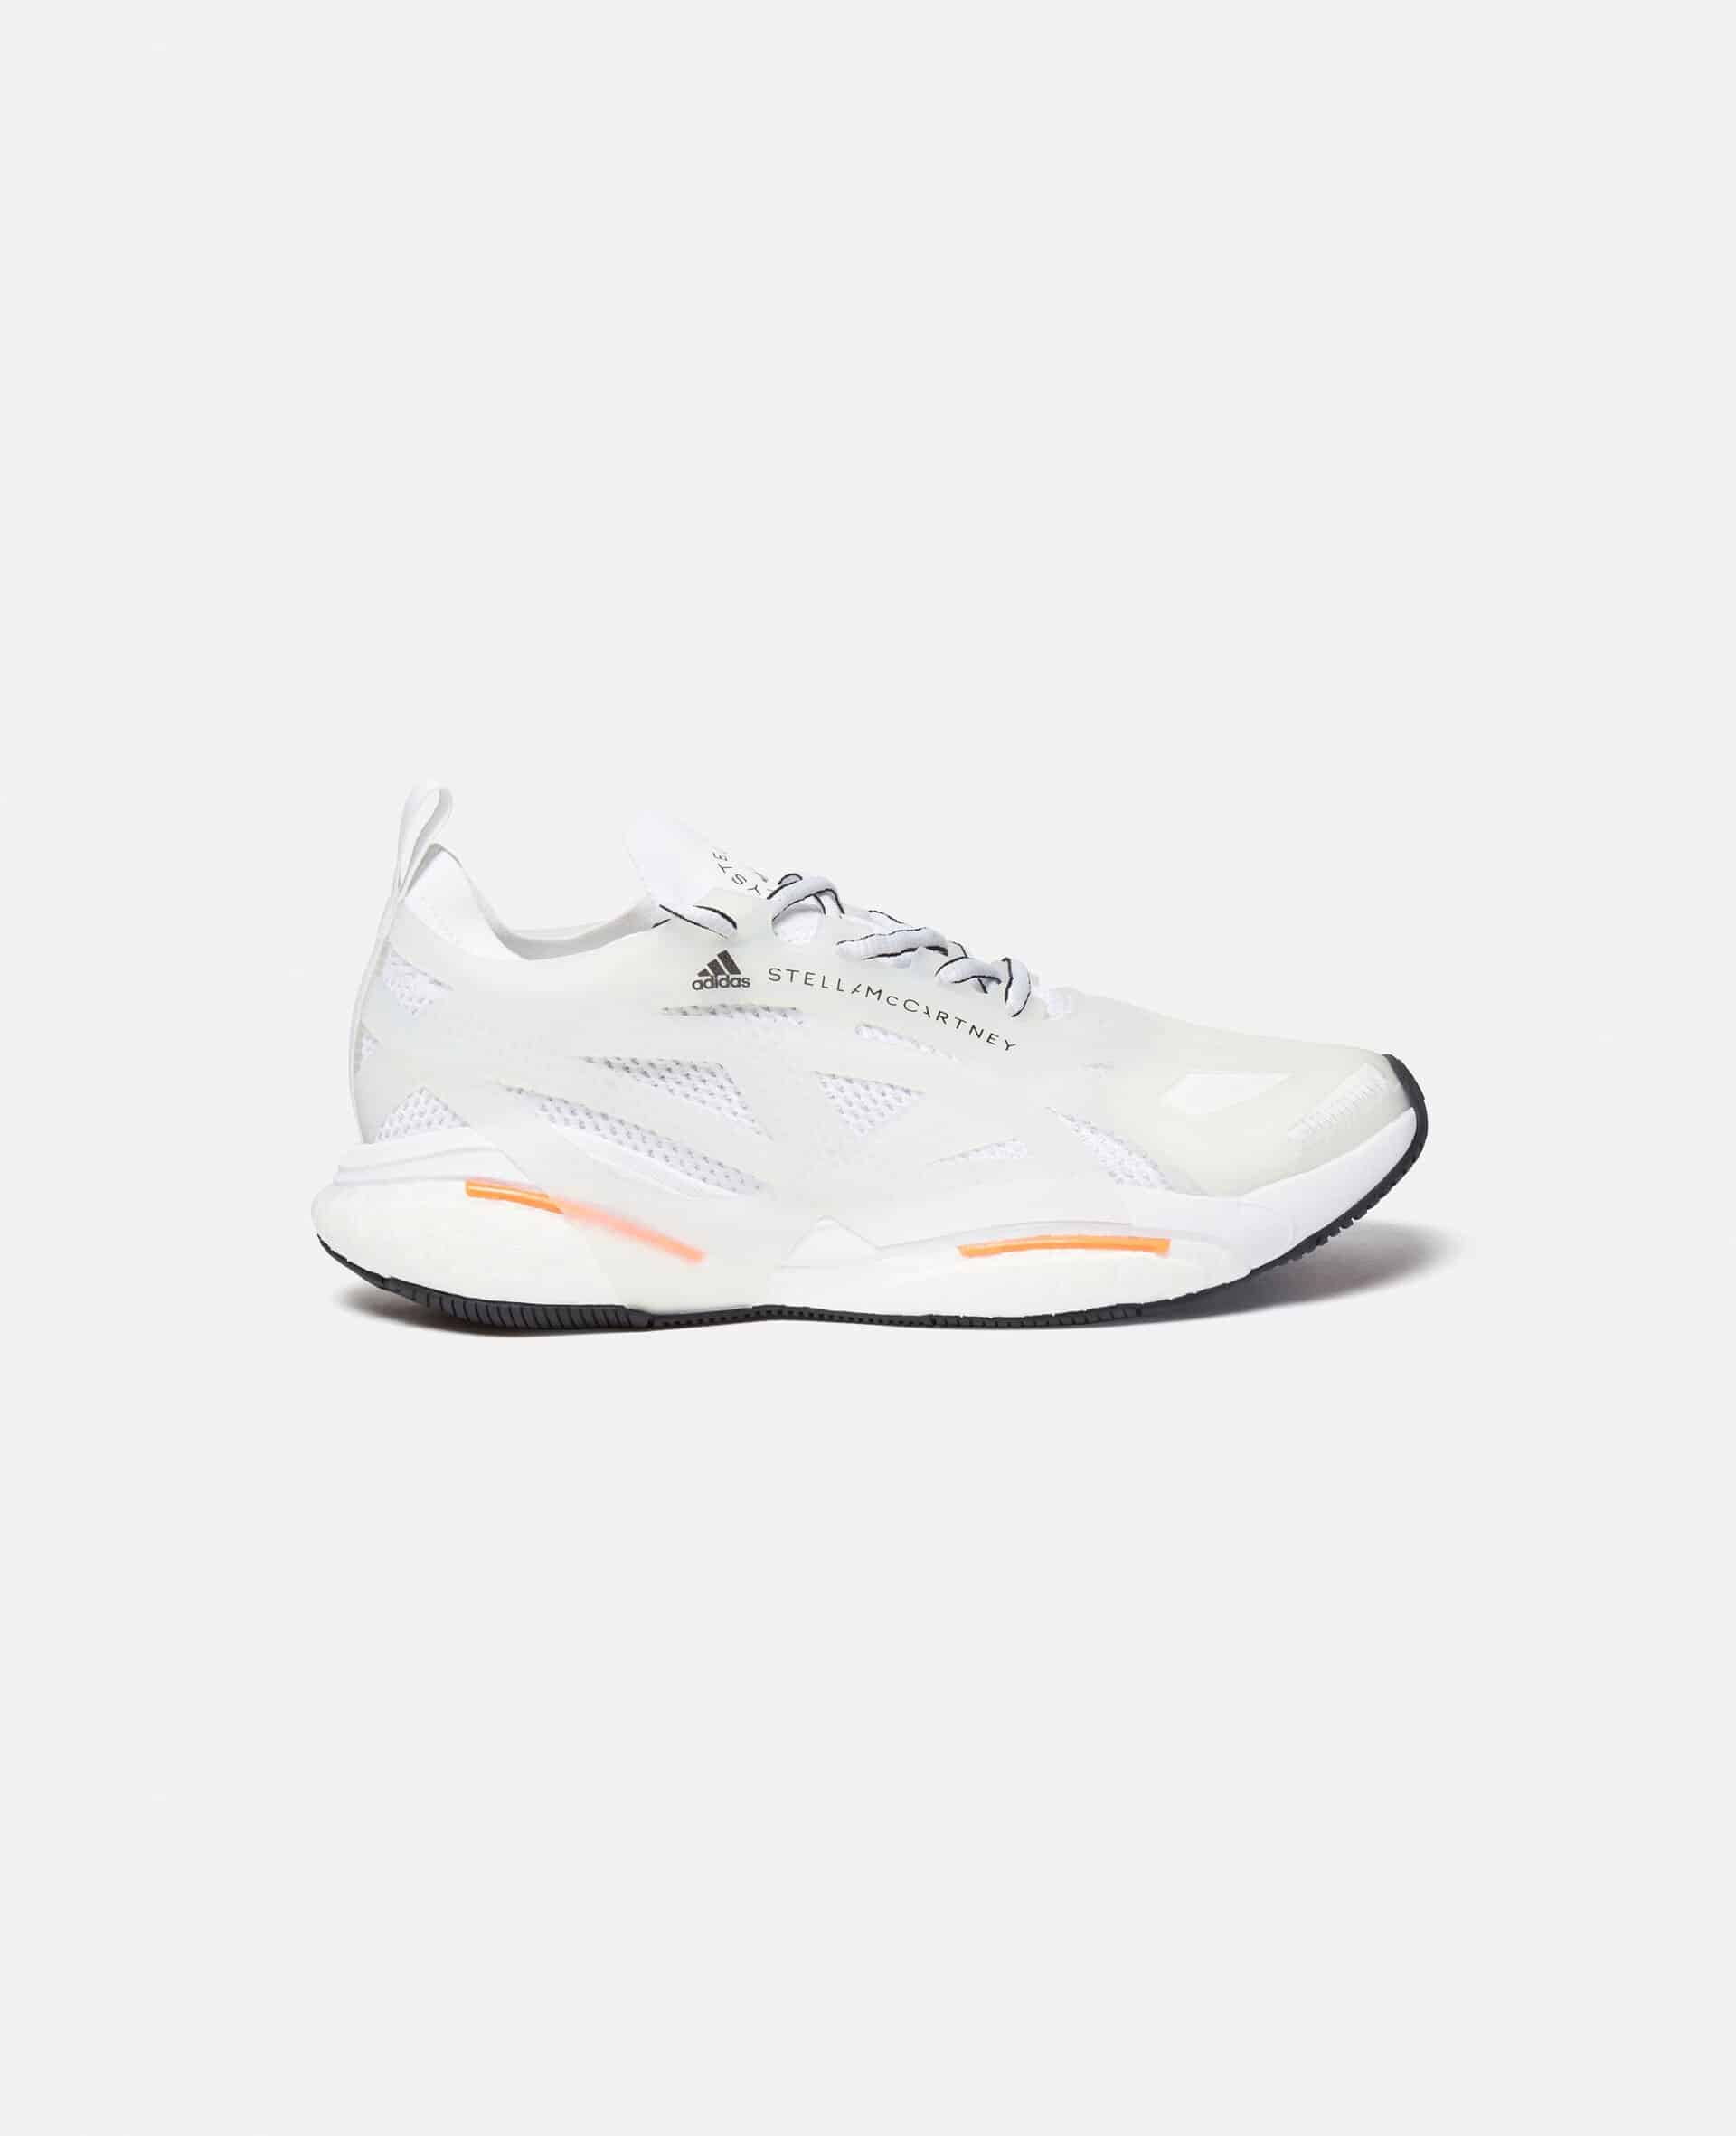 Adidas by Stella McCartney Solarglide white sneakers